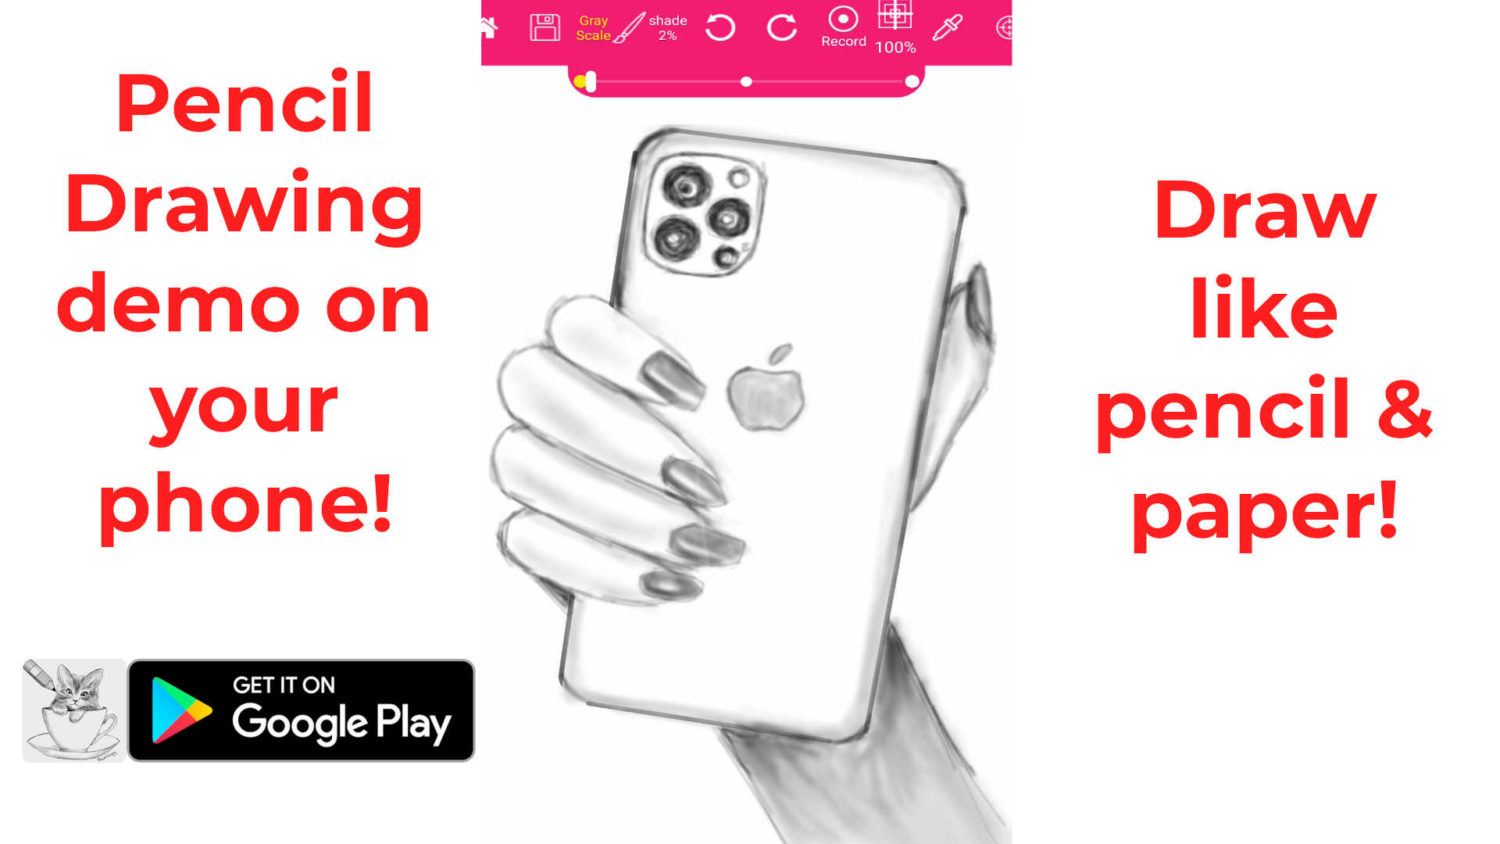 featured - pencil drawing of a phone tutorial